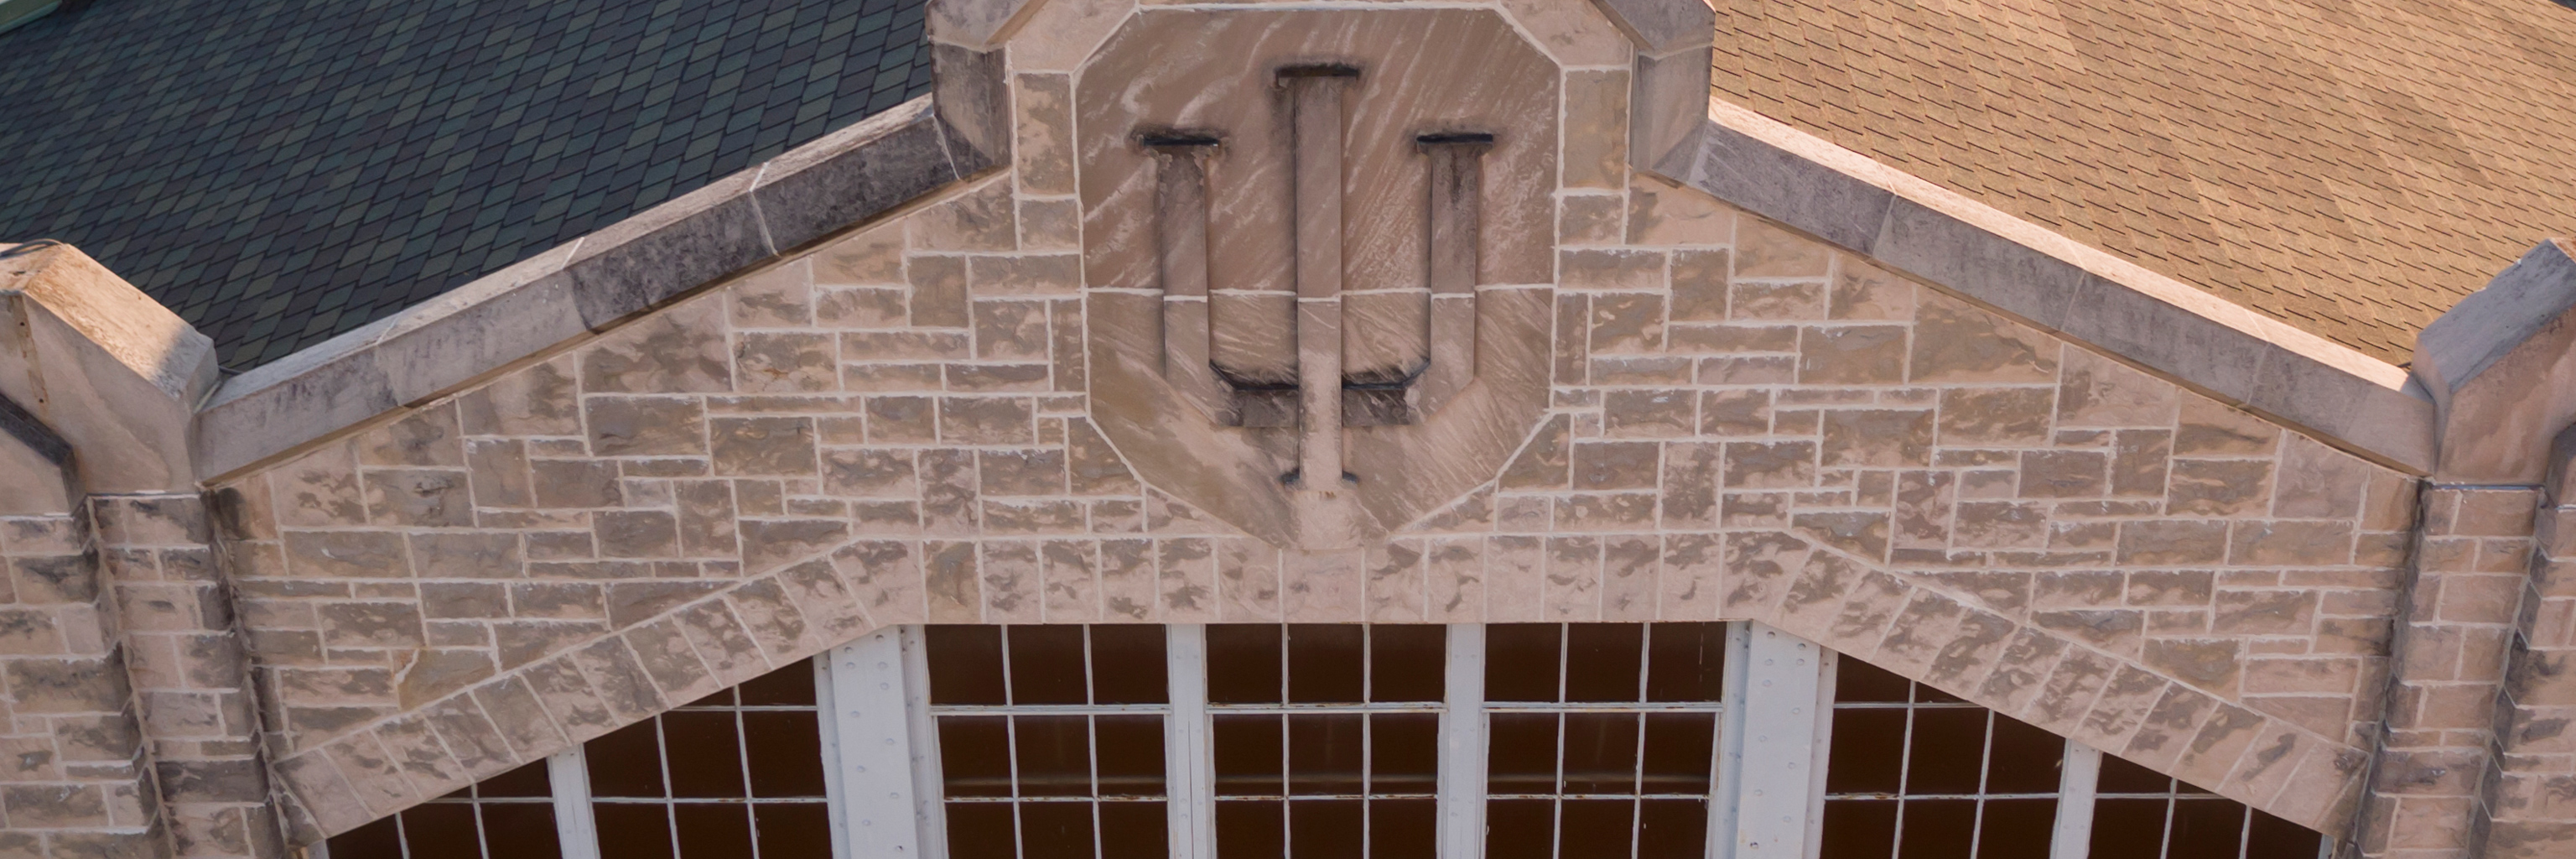 A limestone carving of the IU trident logo.